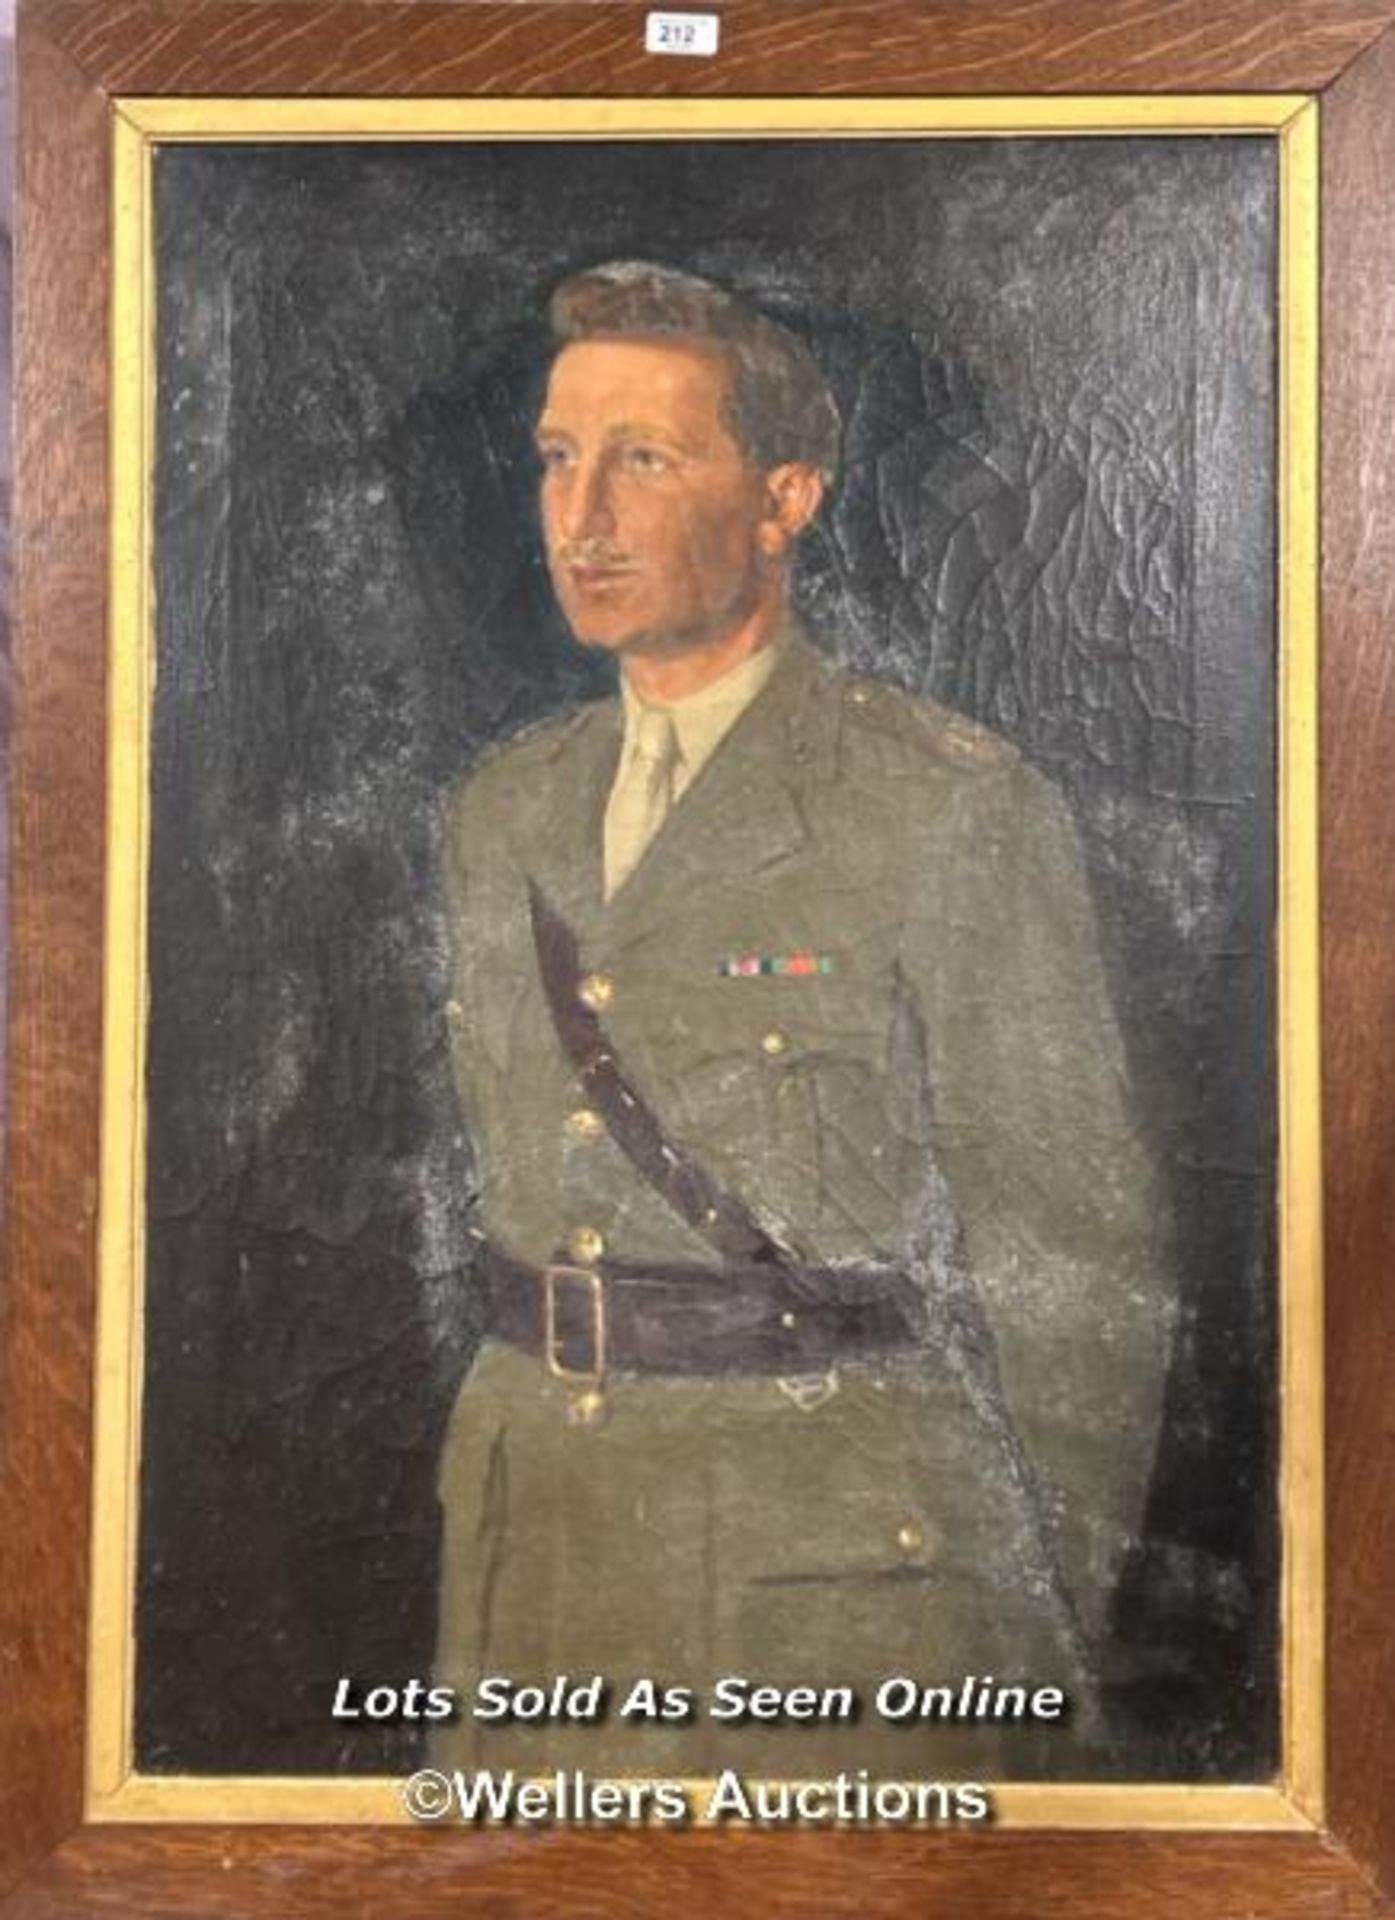 OIL ON CANVAS DEPICTING OFFICER, POSSIBLY FROM THE ROYAL ARTILLERY, BY H. BENNETT (1946), 89 X 61CM